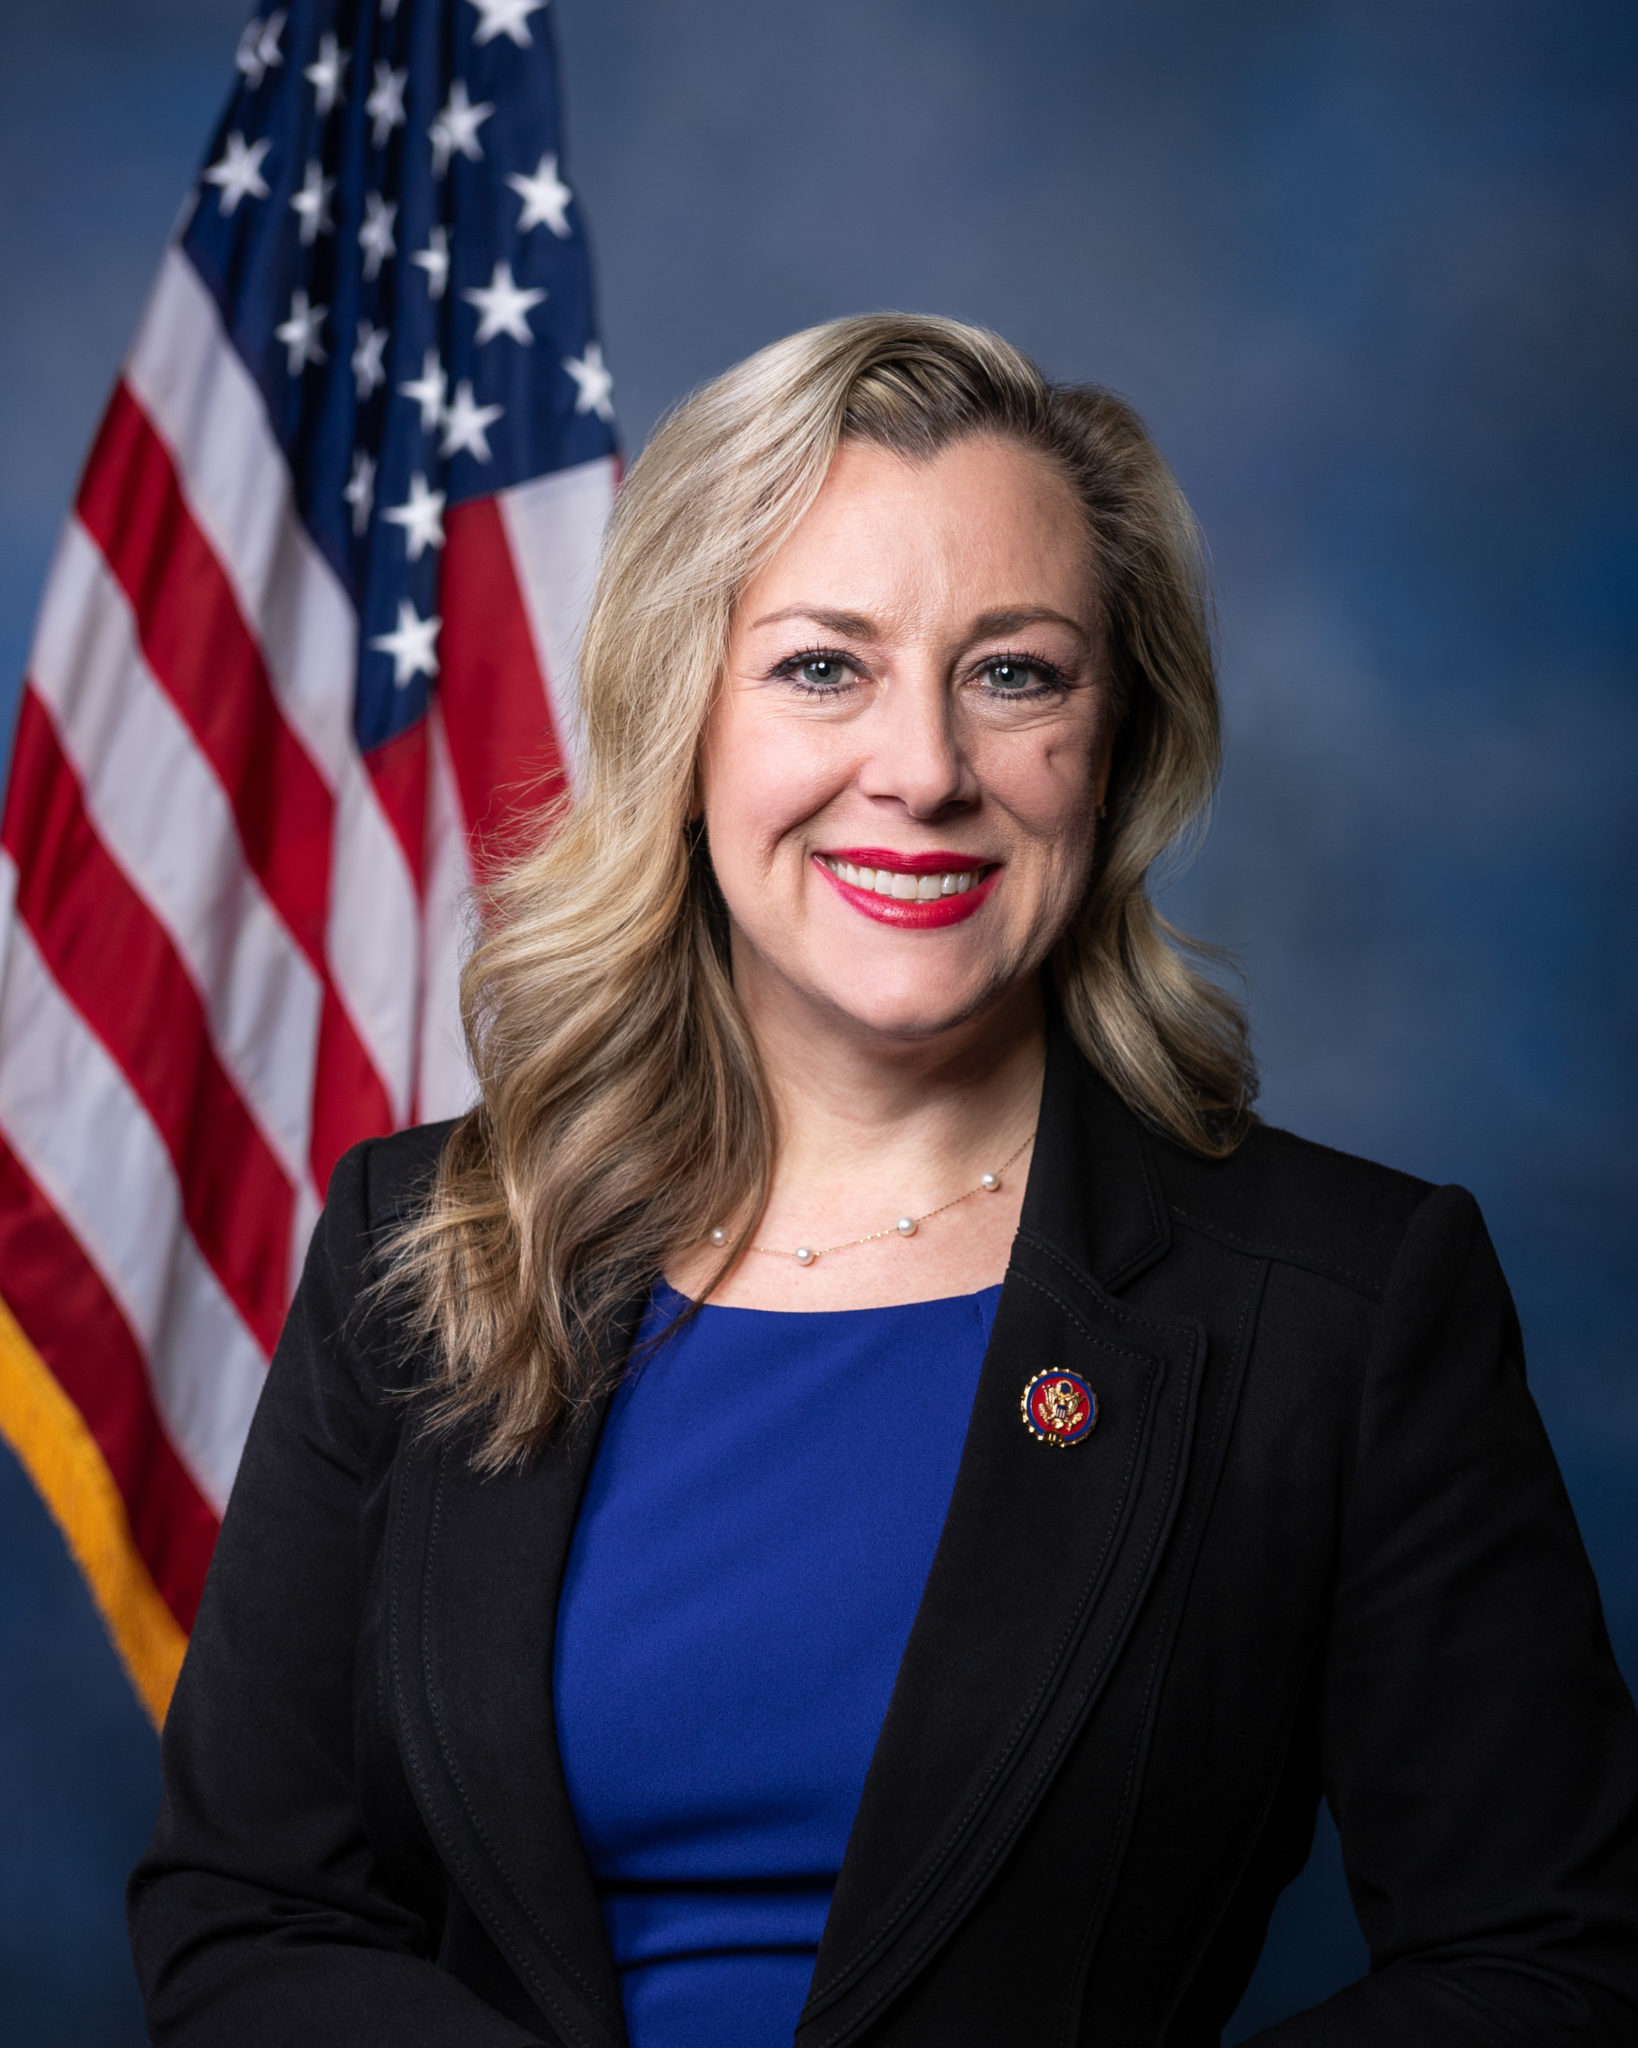 CAIR Oklahoma to Hold 5th Annual Ramadan Iftar with Keynote Speaker Congresswoman Kendra Horn